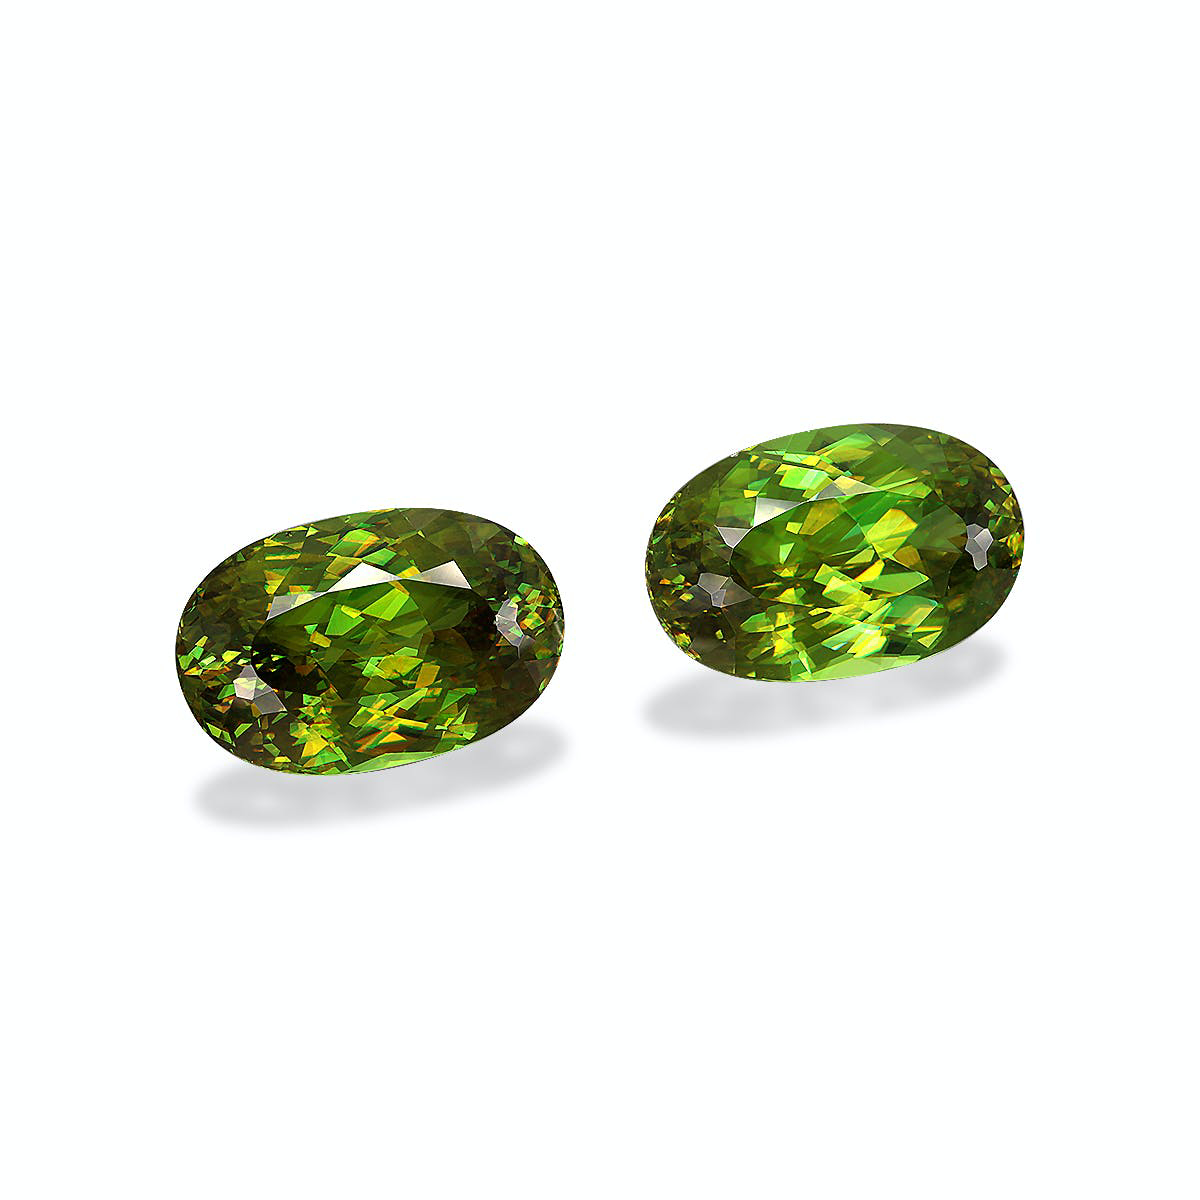 Picture of Green Sphene 23.10ct - Pair (SH1032)